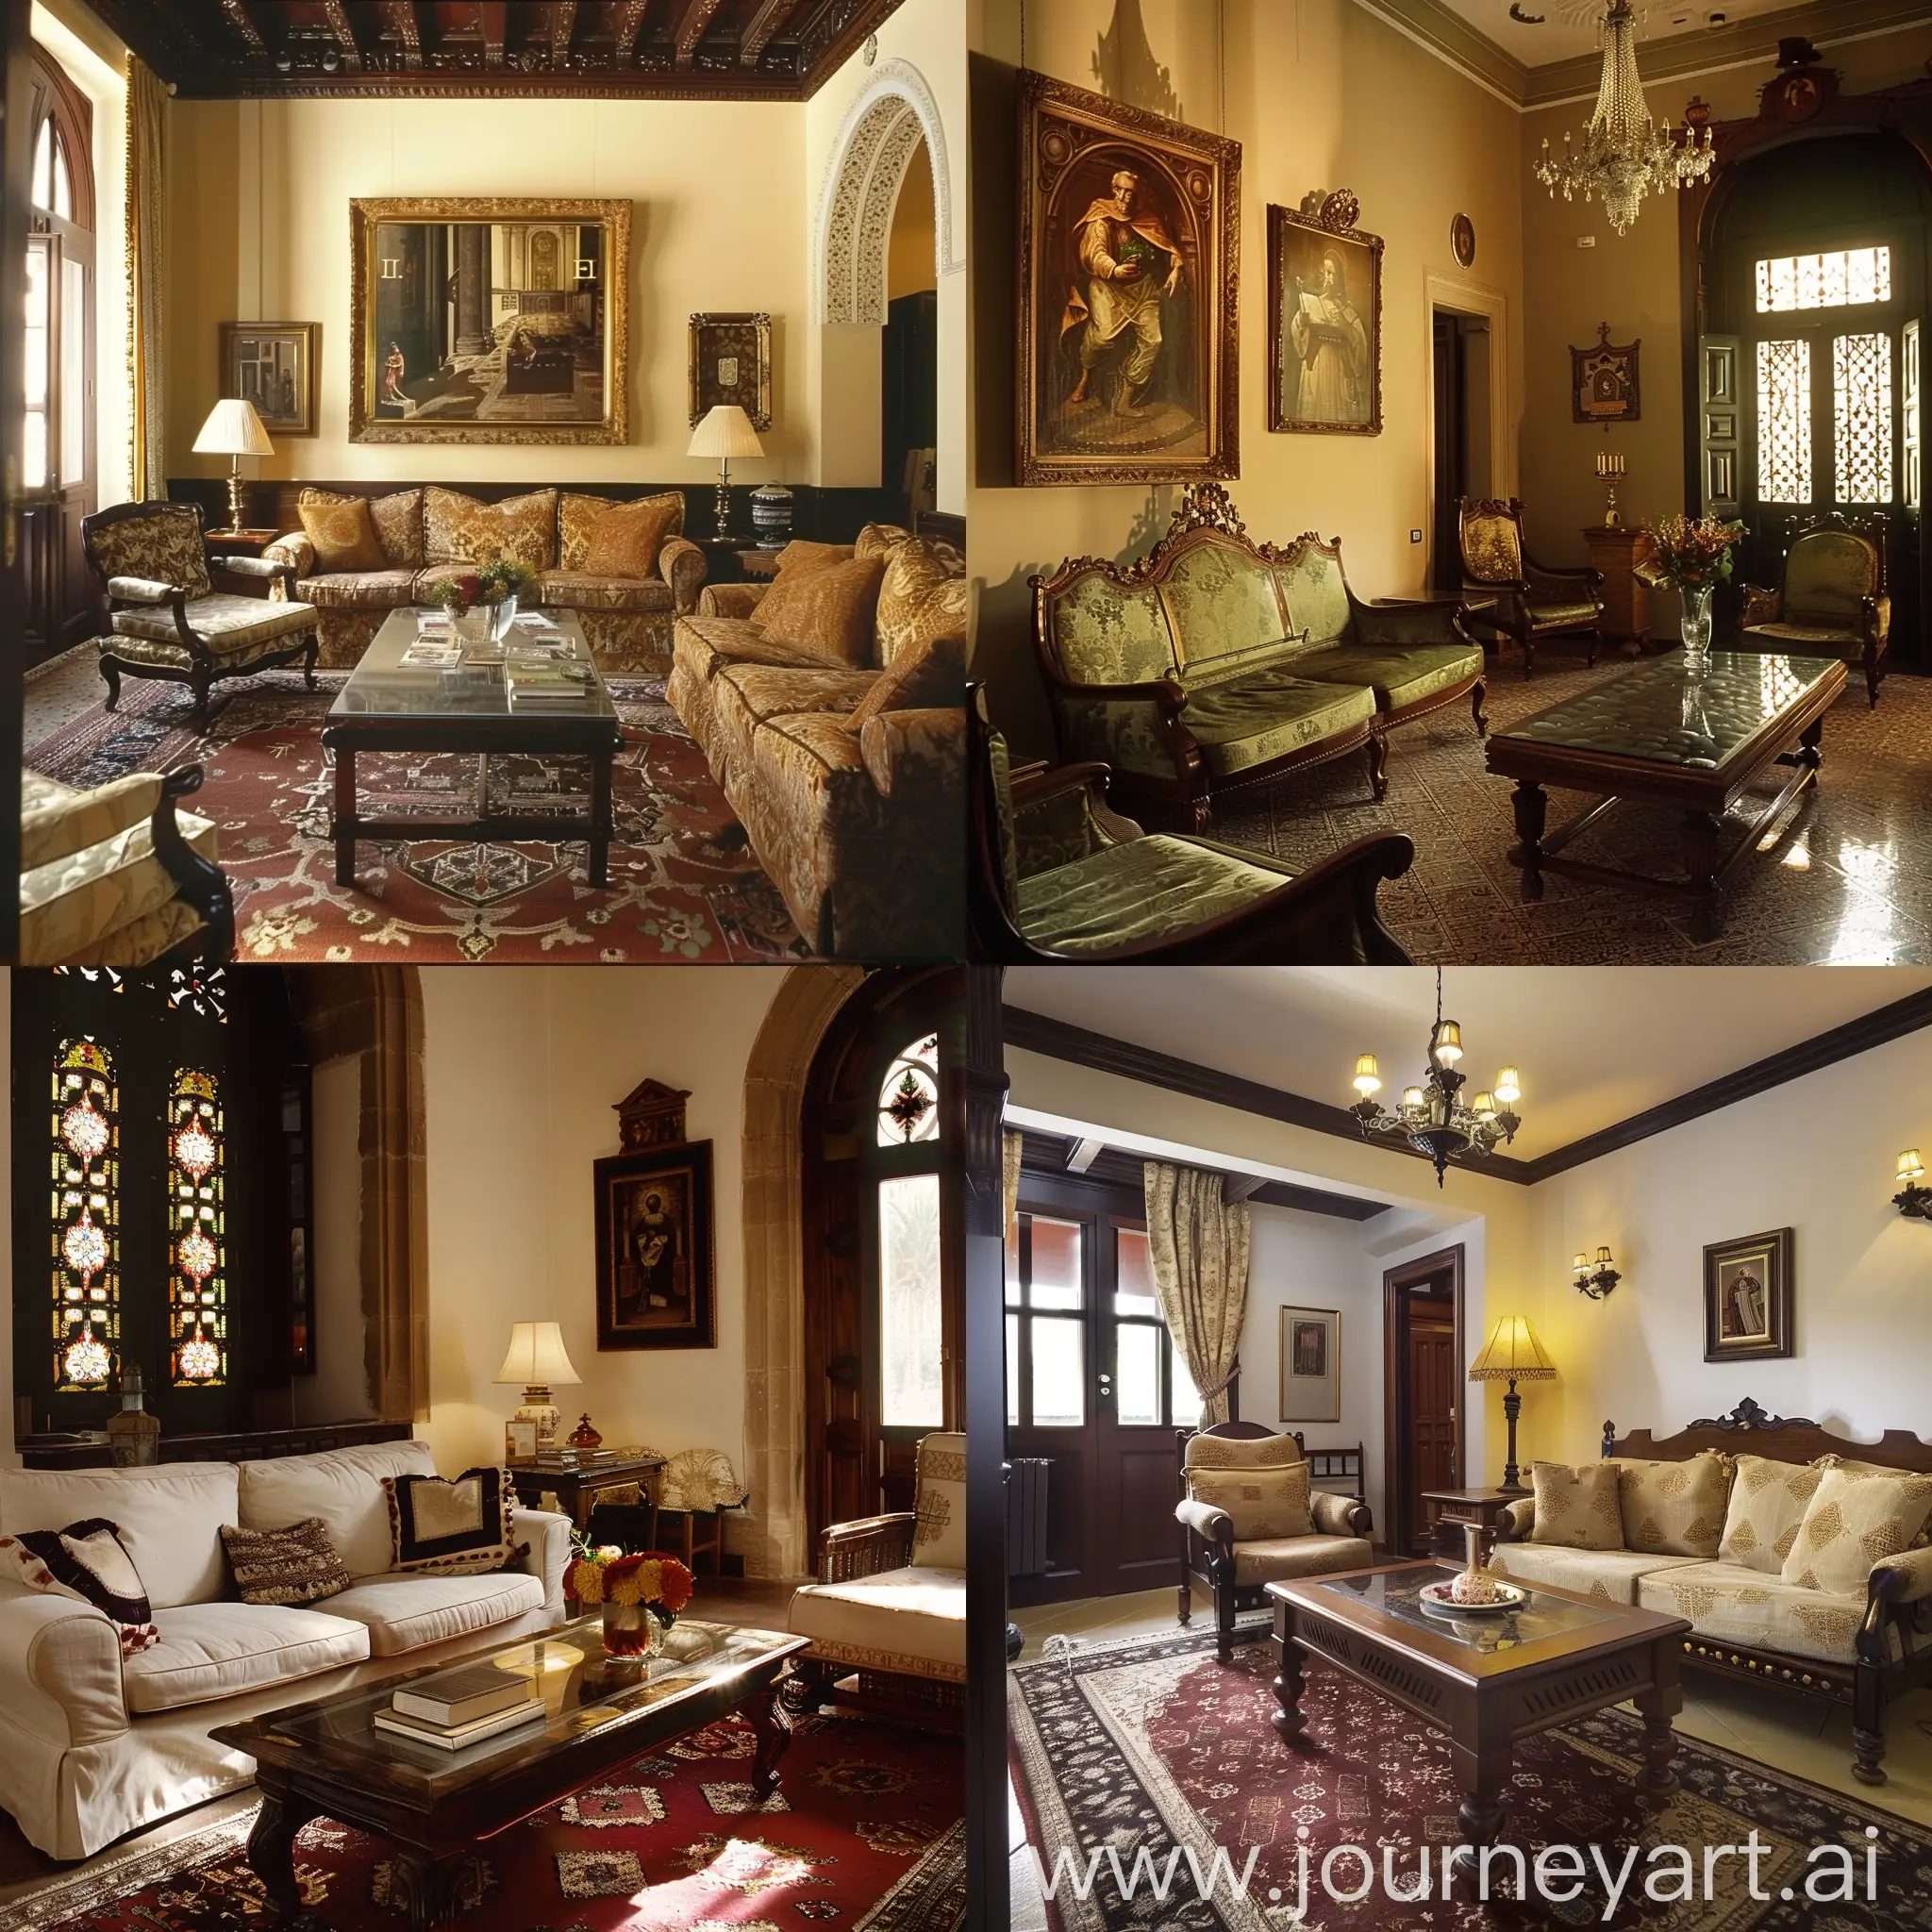 Vintage-Spanish-Hotel-Living-Room-with-Modest-and-Religious-Ambiance